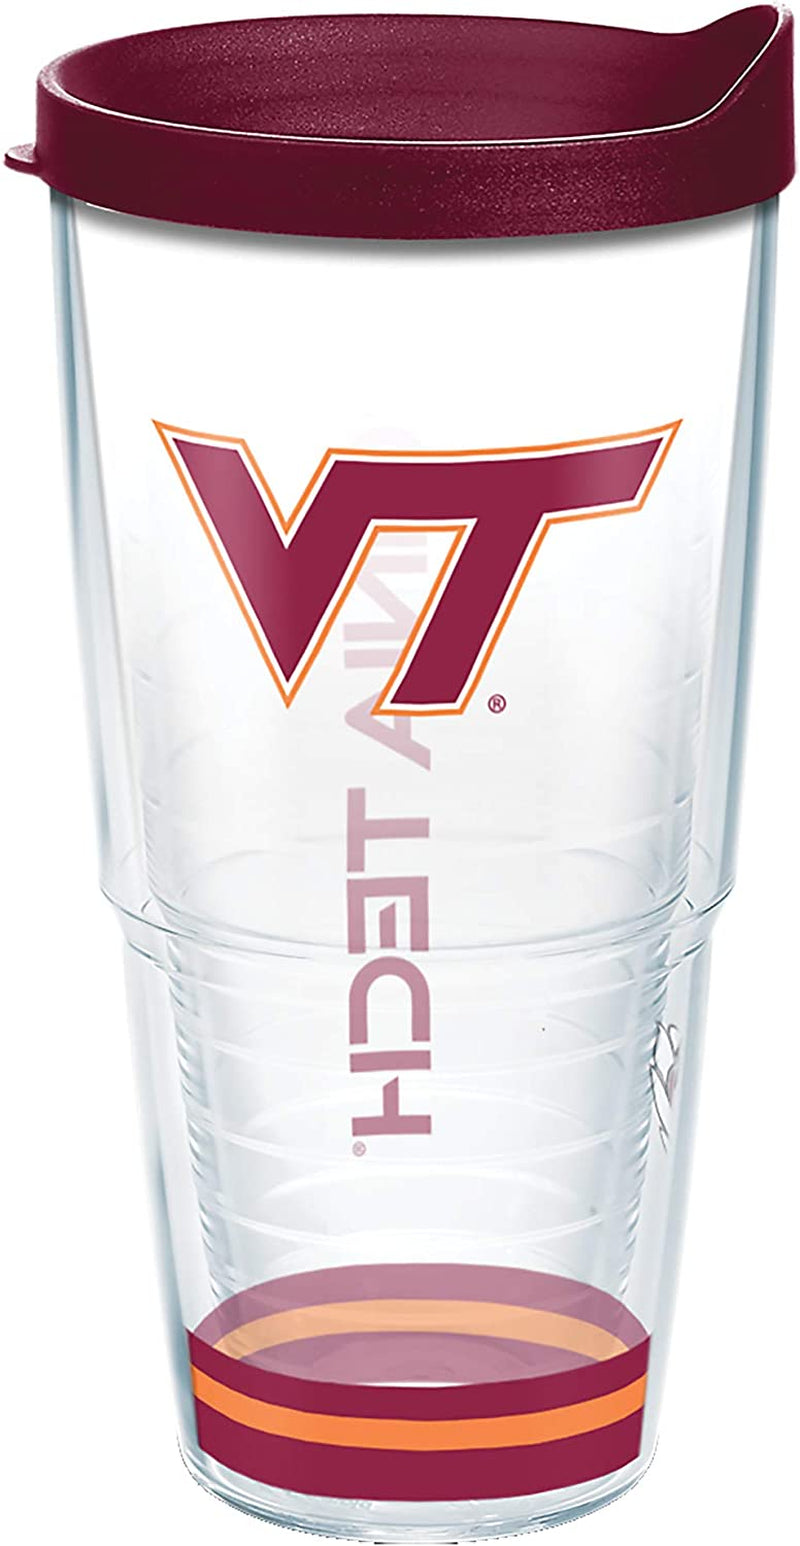 Tervis Virginia Tech University Hokies Made in USA Double Walled Insulated Tumbler, 1 Count (Pack of 1), Maroon Home & Garden > Kitchen & Dining > Tableware > Drinkware Tervis Arctic 24 oz 